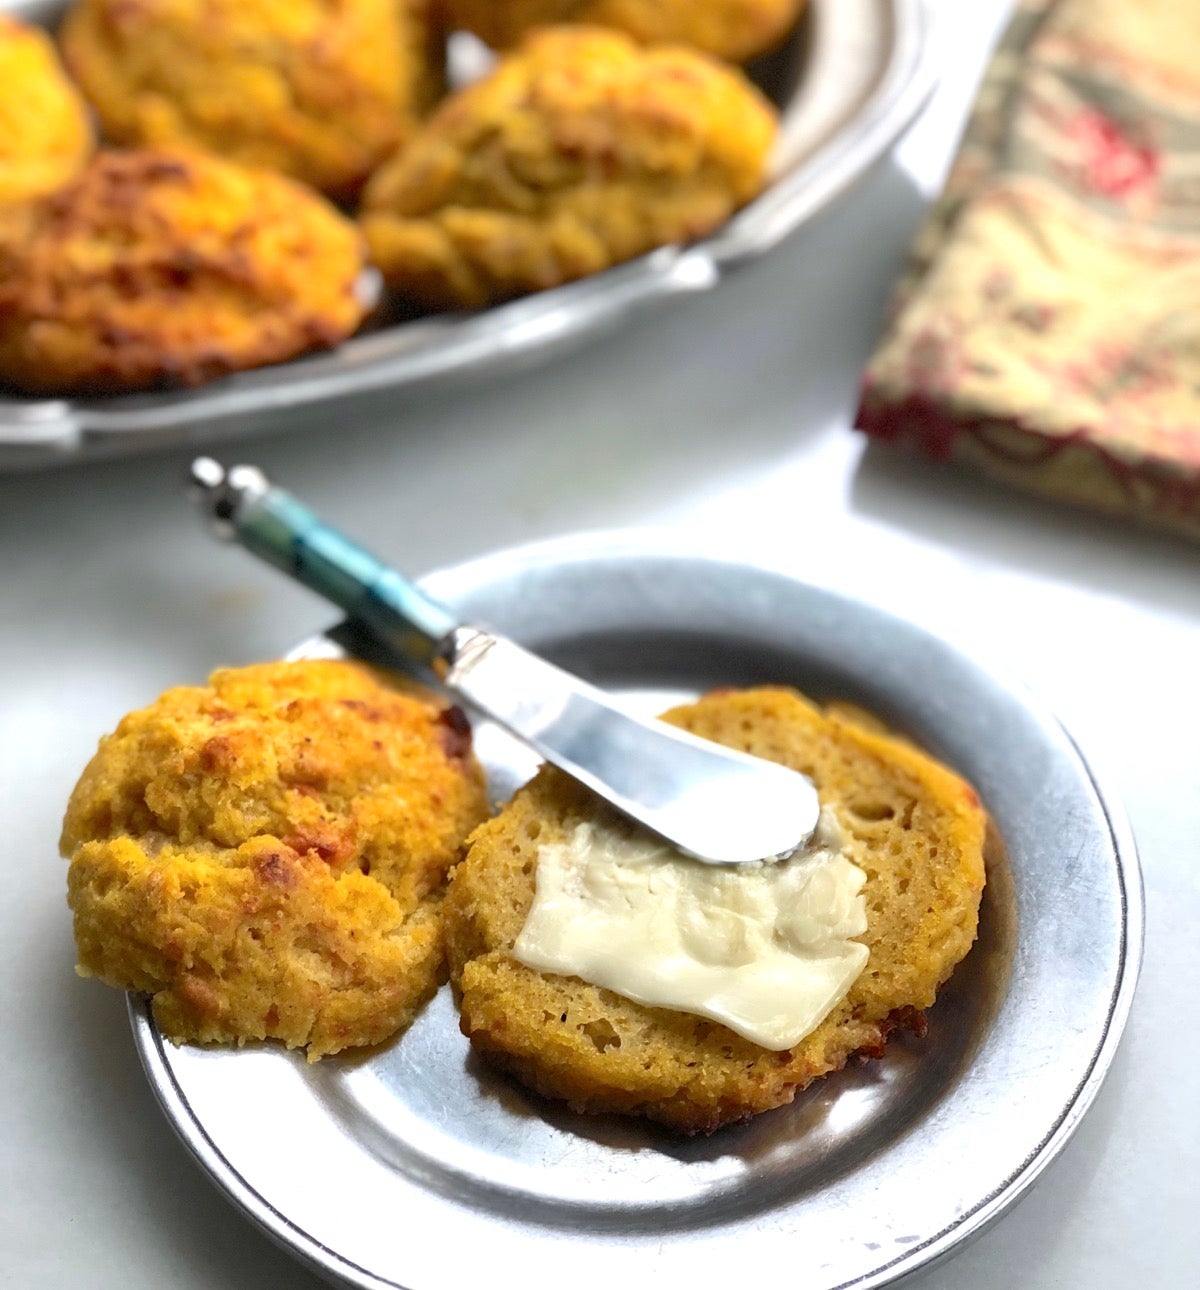 Pumpkin cheddar biscuit on a plate, spread with soft butter, more biscuits in the background.